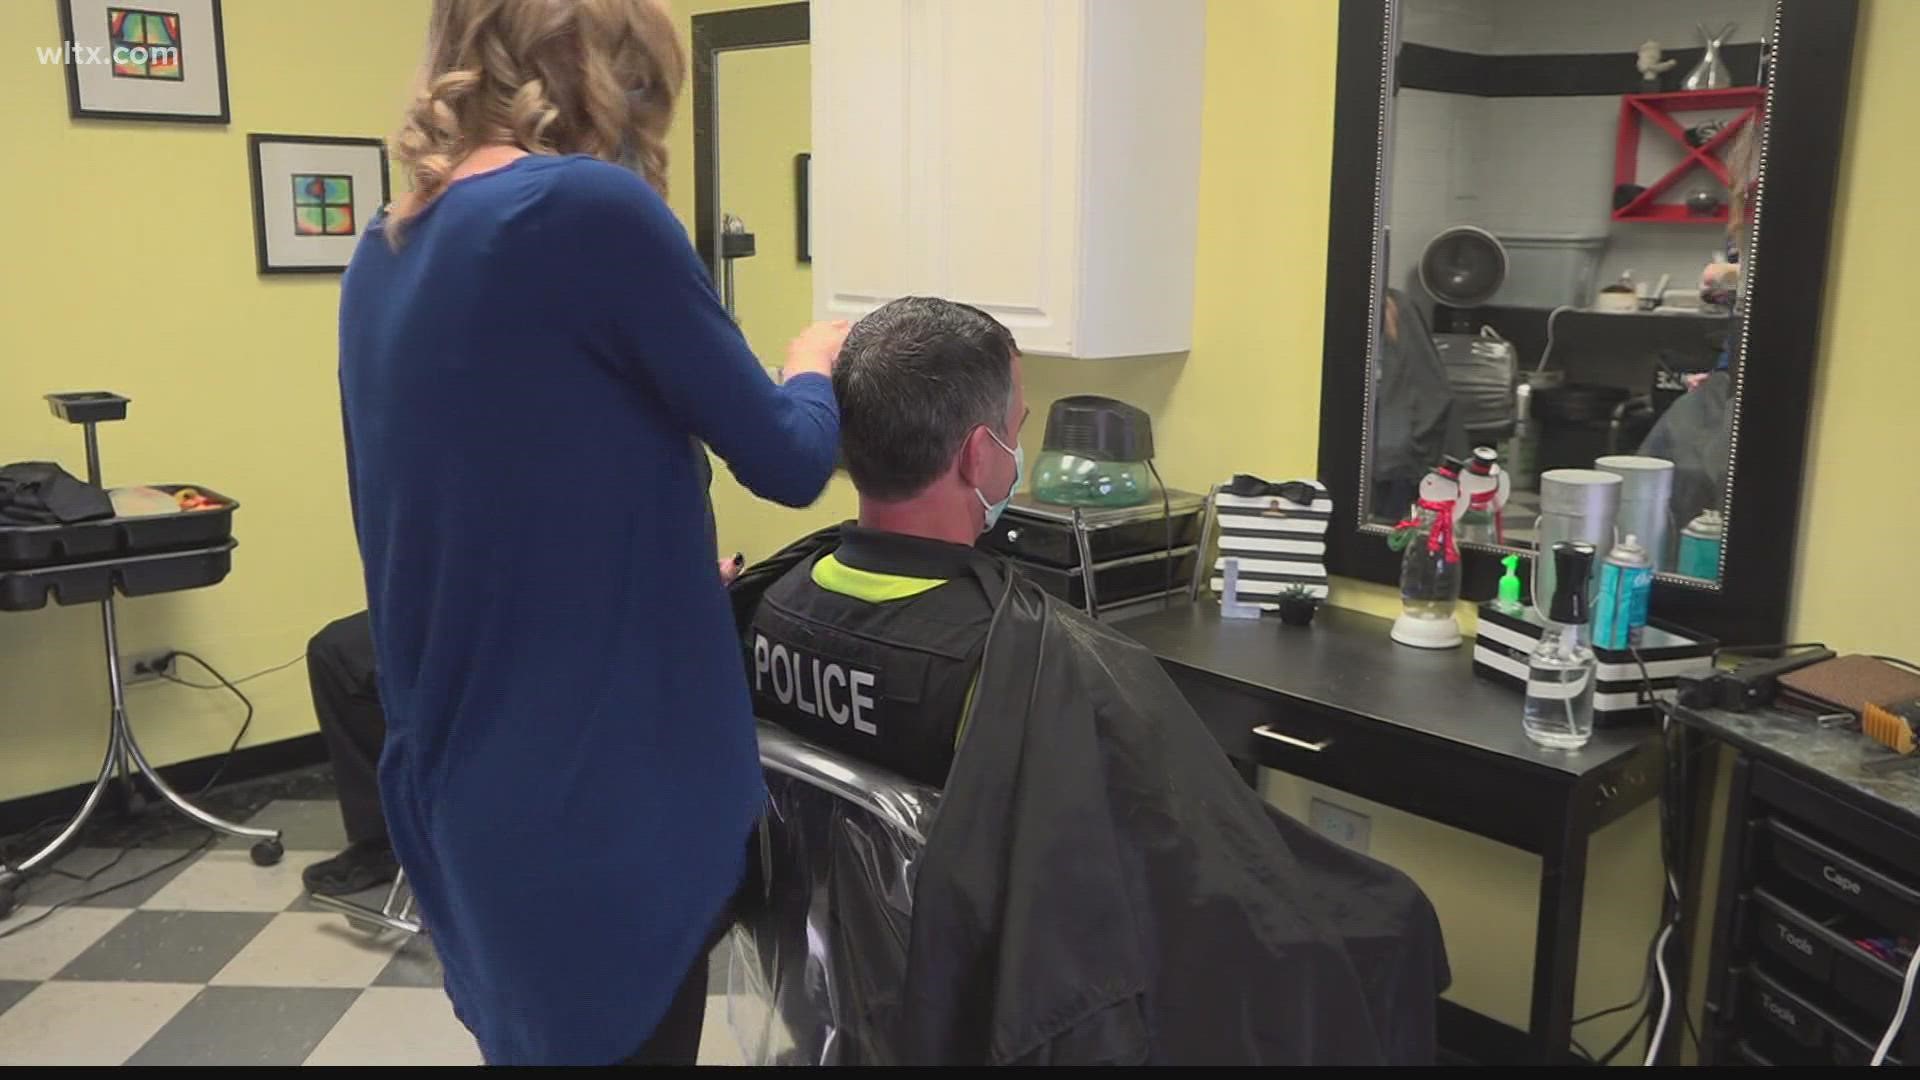 From February through April, members of the police department will visit barbershops and hair salons around town to get hair cuts and listen to community concerns.